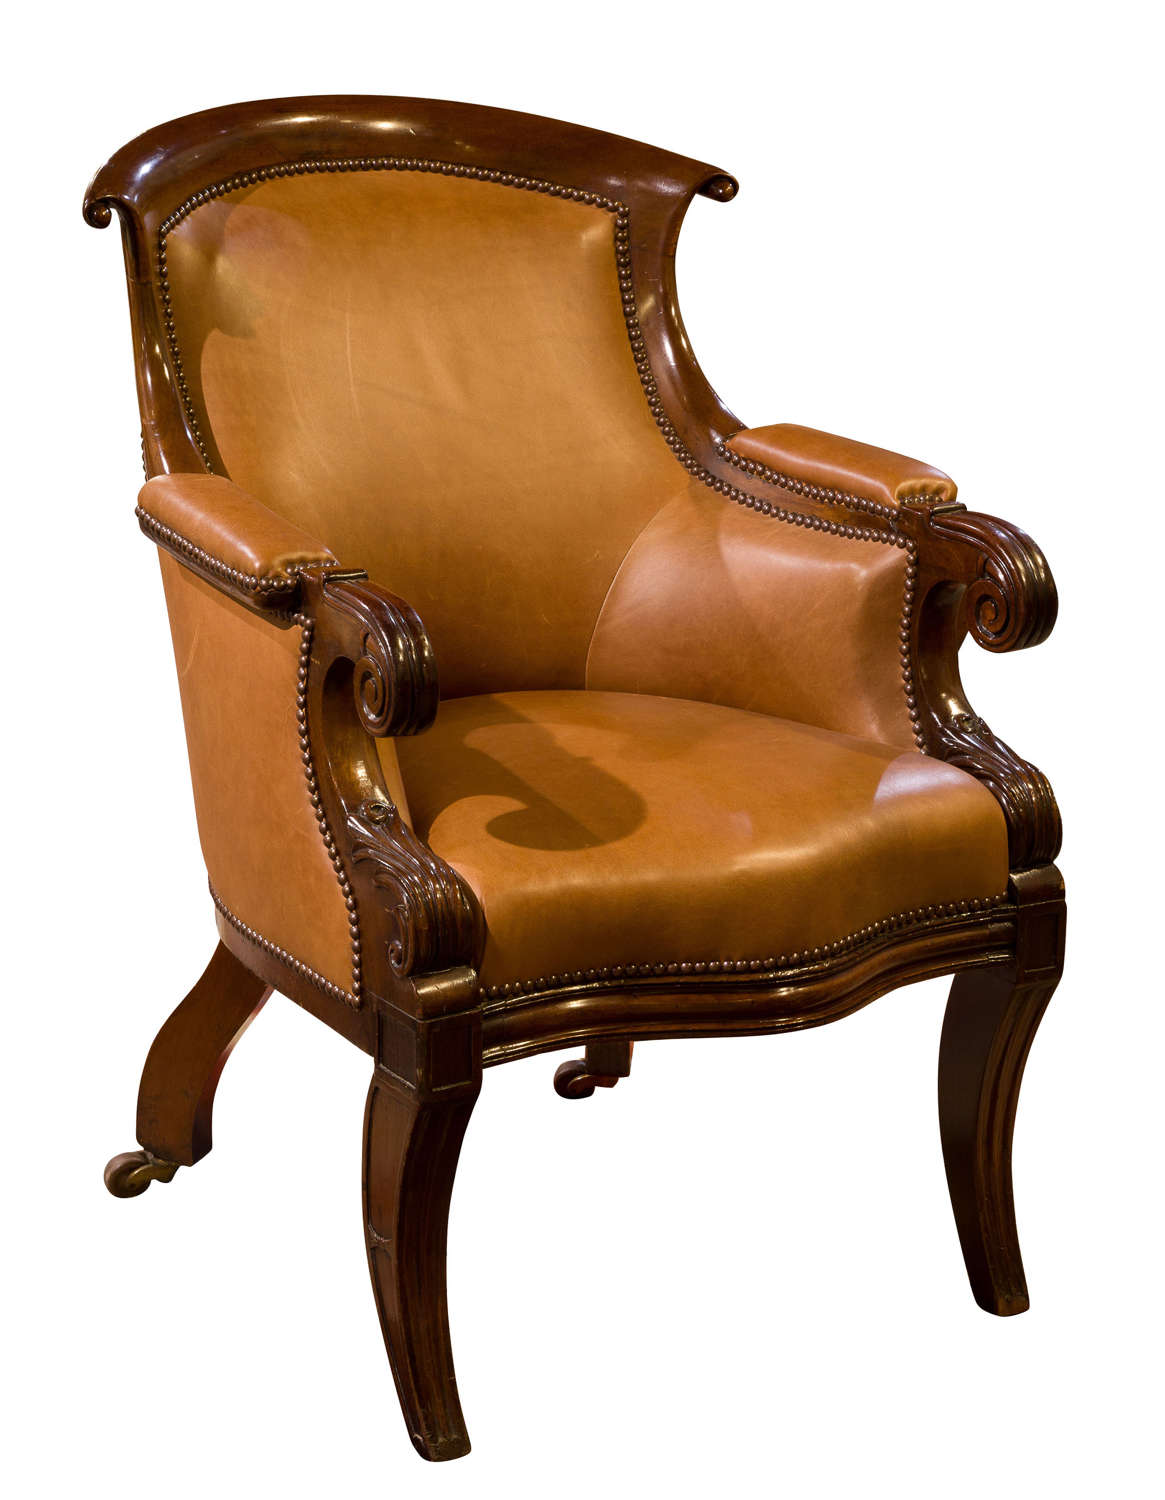 A 20thC mahogany Regency style leather upholstered library tub chair